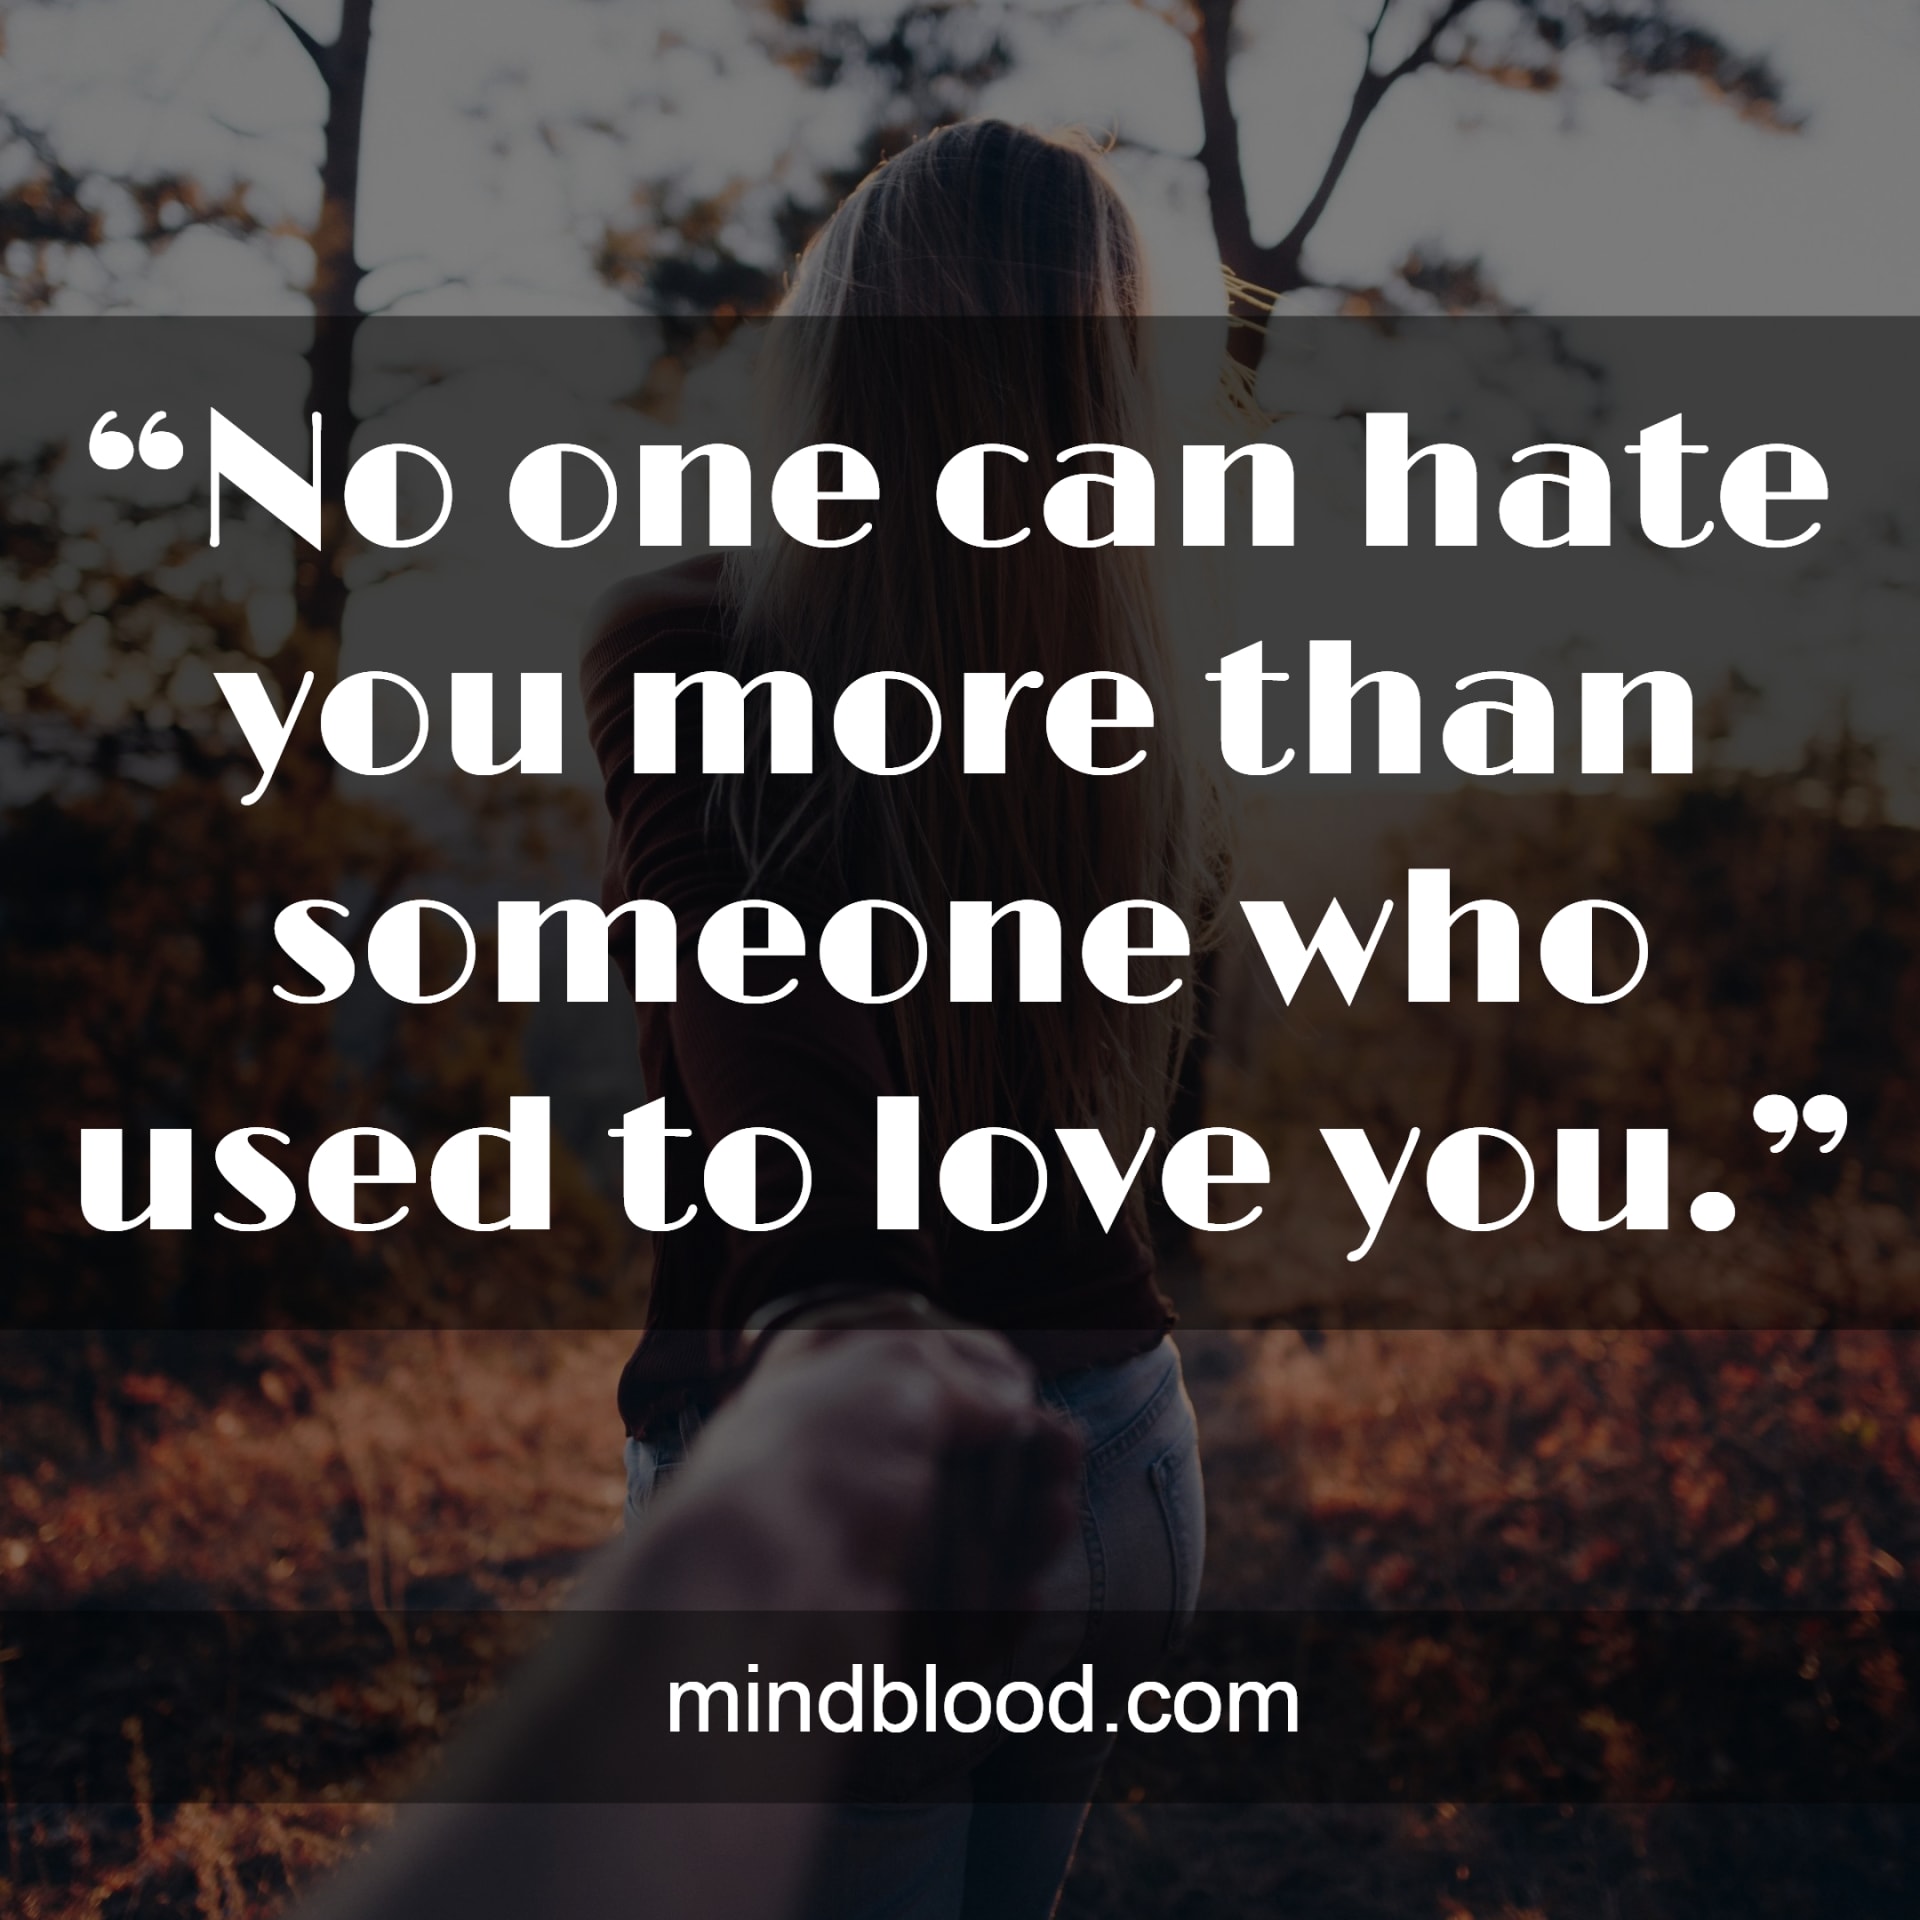 Quotes about hating someone you used to love(Top 28)